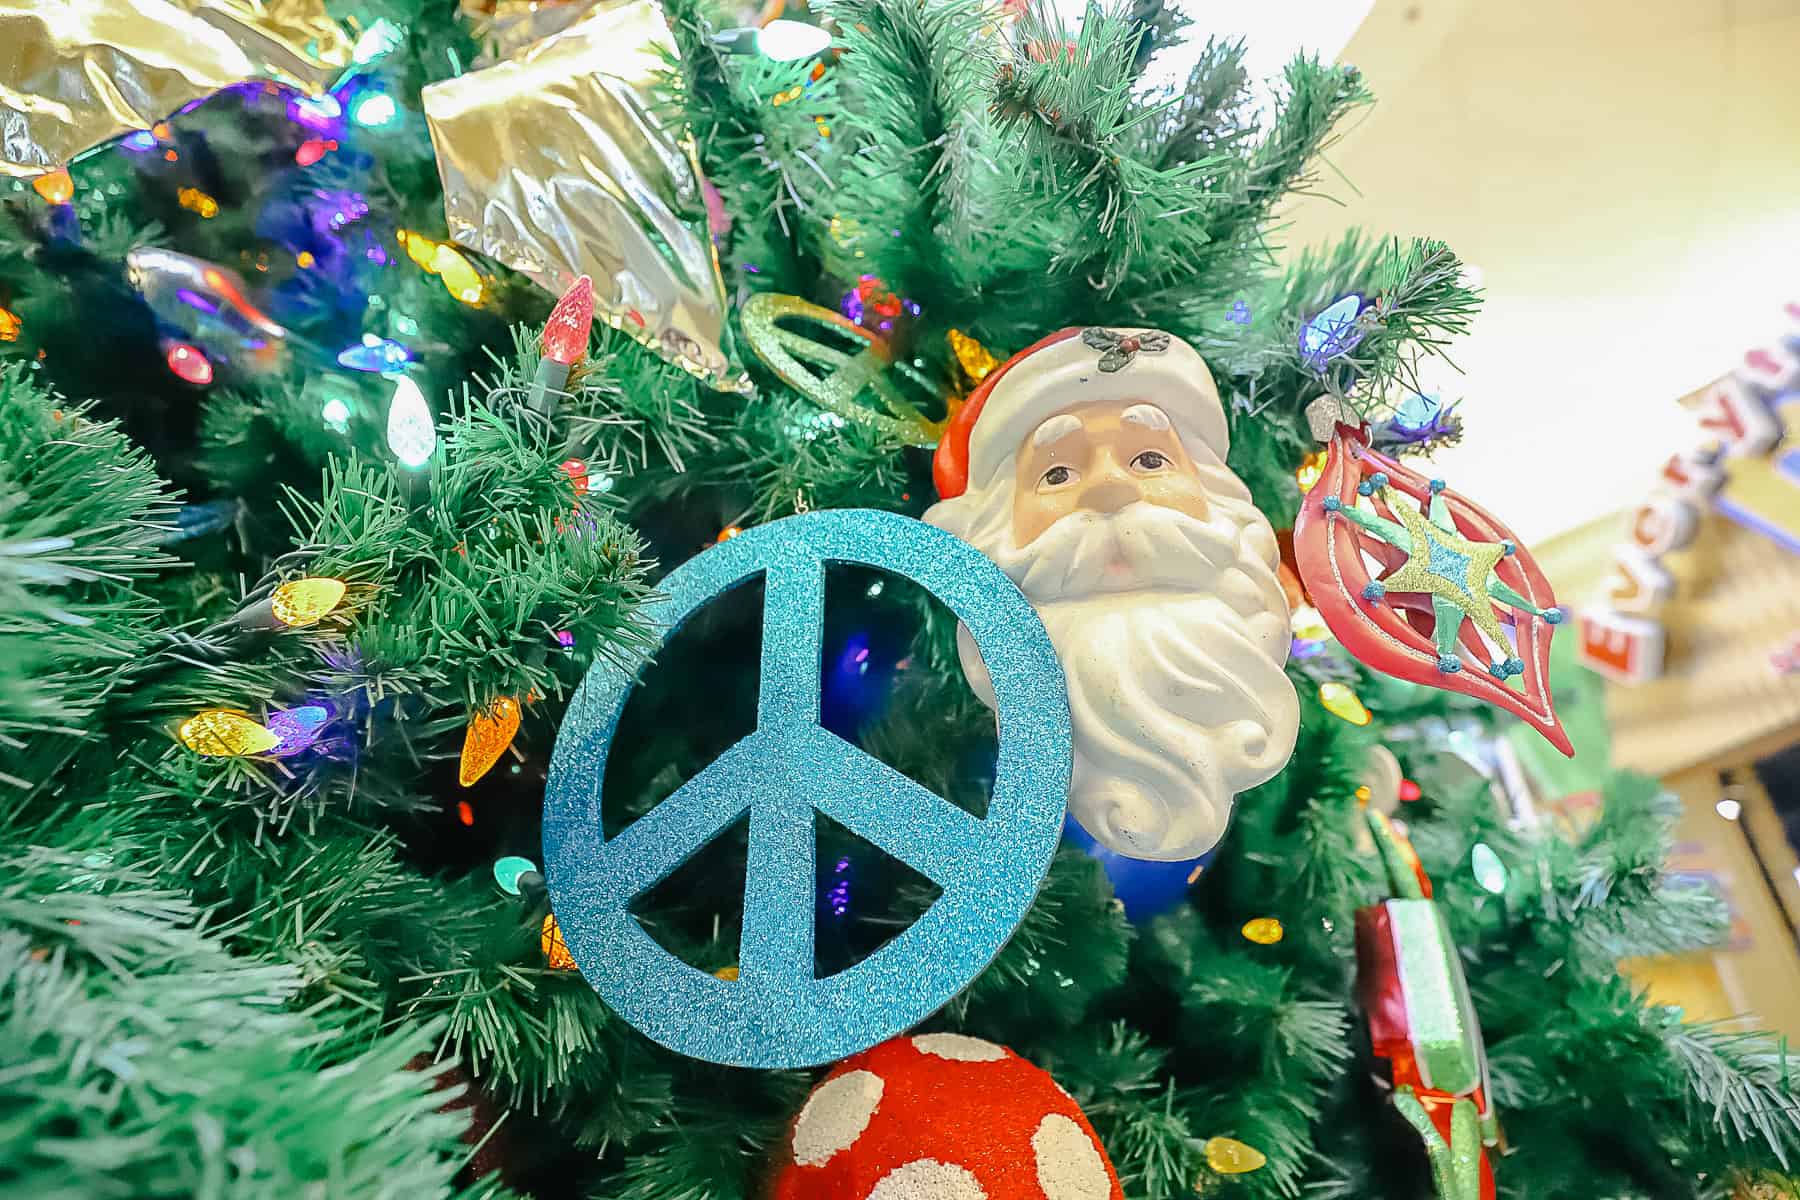 a peace sign ornament and a Santa Claus 